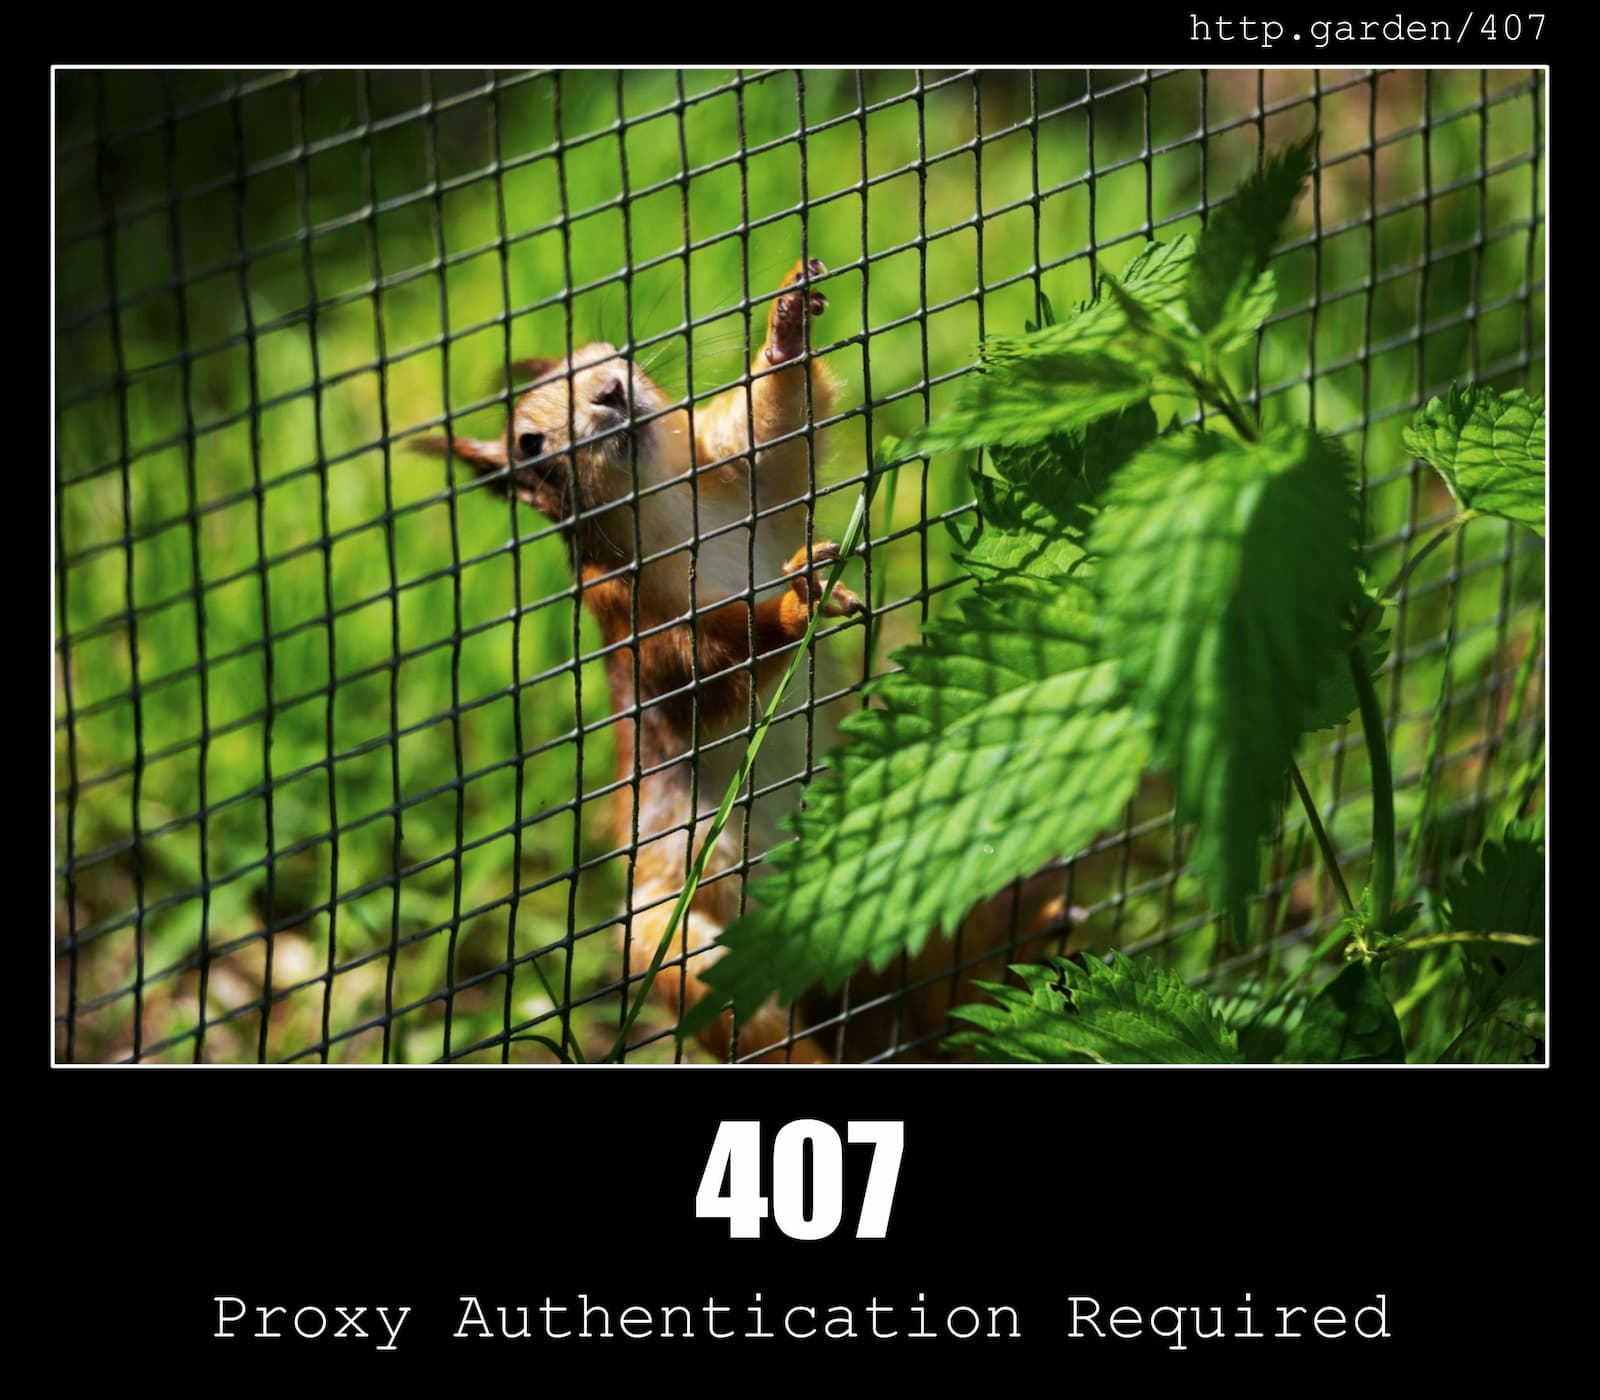 HTTP Status Code 407 Proxy Authentication Required & Gardening